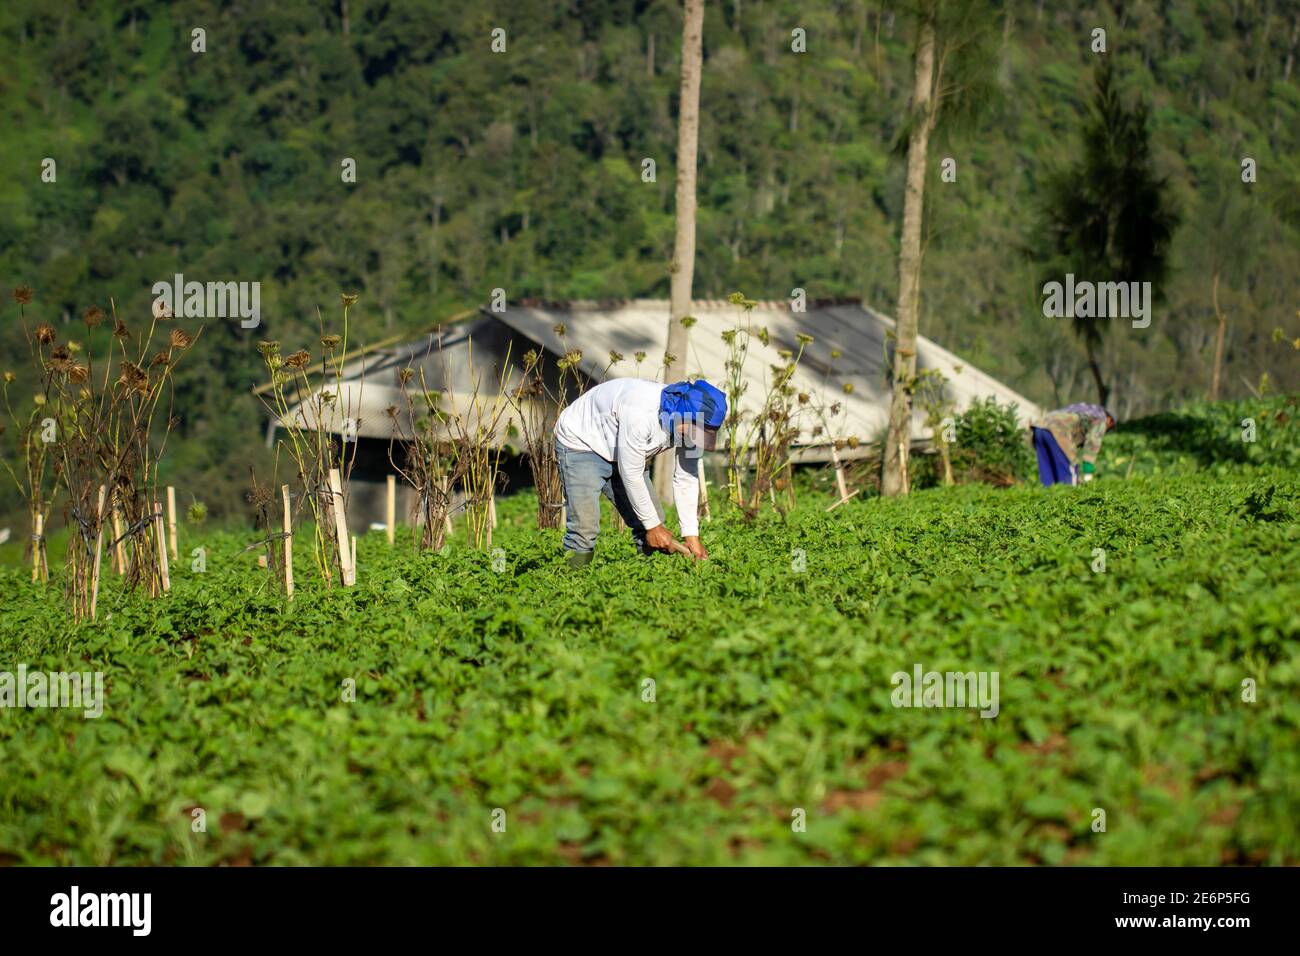 upland farmers are tending their gardens. vegetable gardening of mustard greens, cabbage and wortel in Brakseng Hill, Batu City. workers are hoeing th Stock Photo